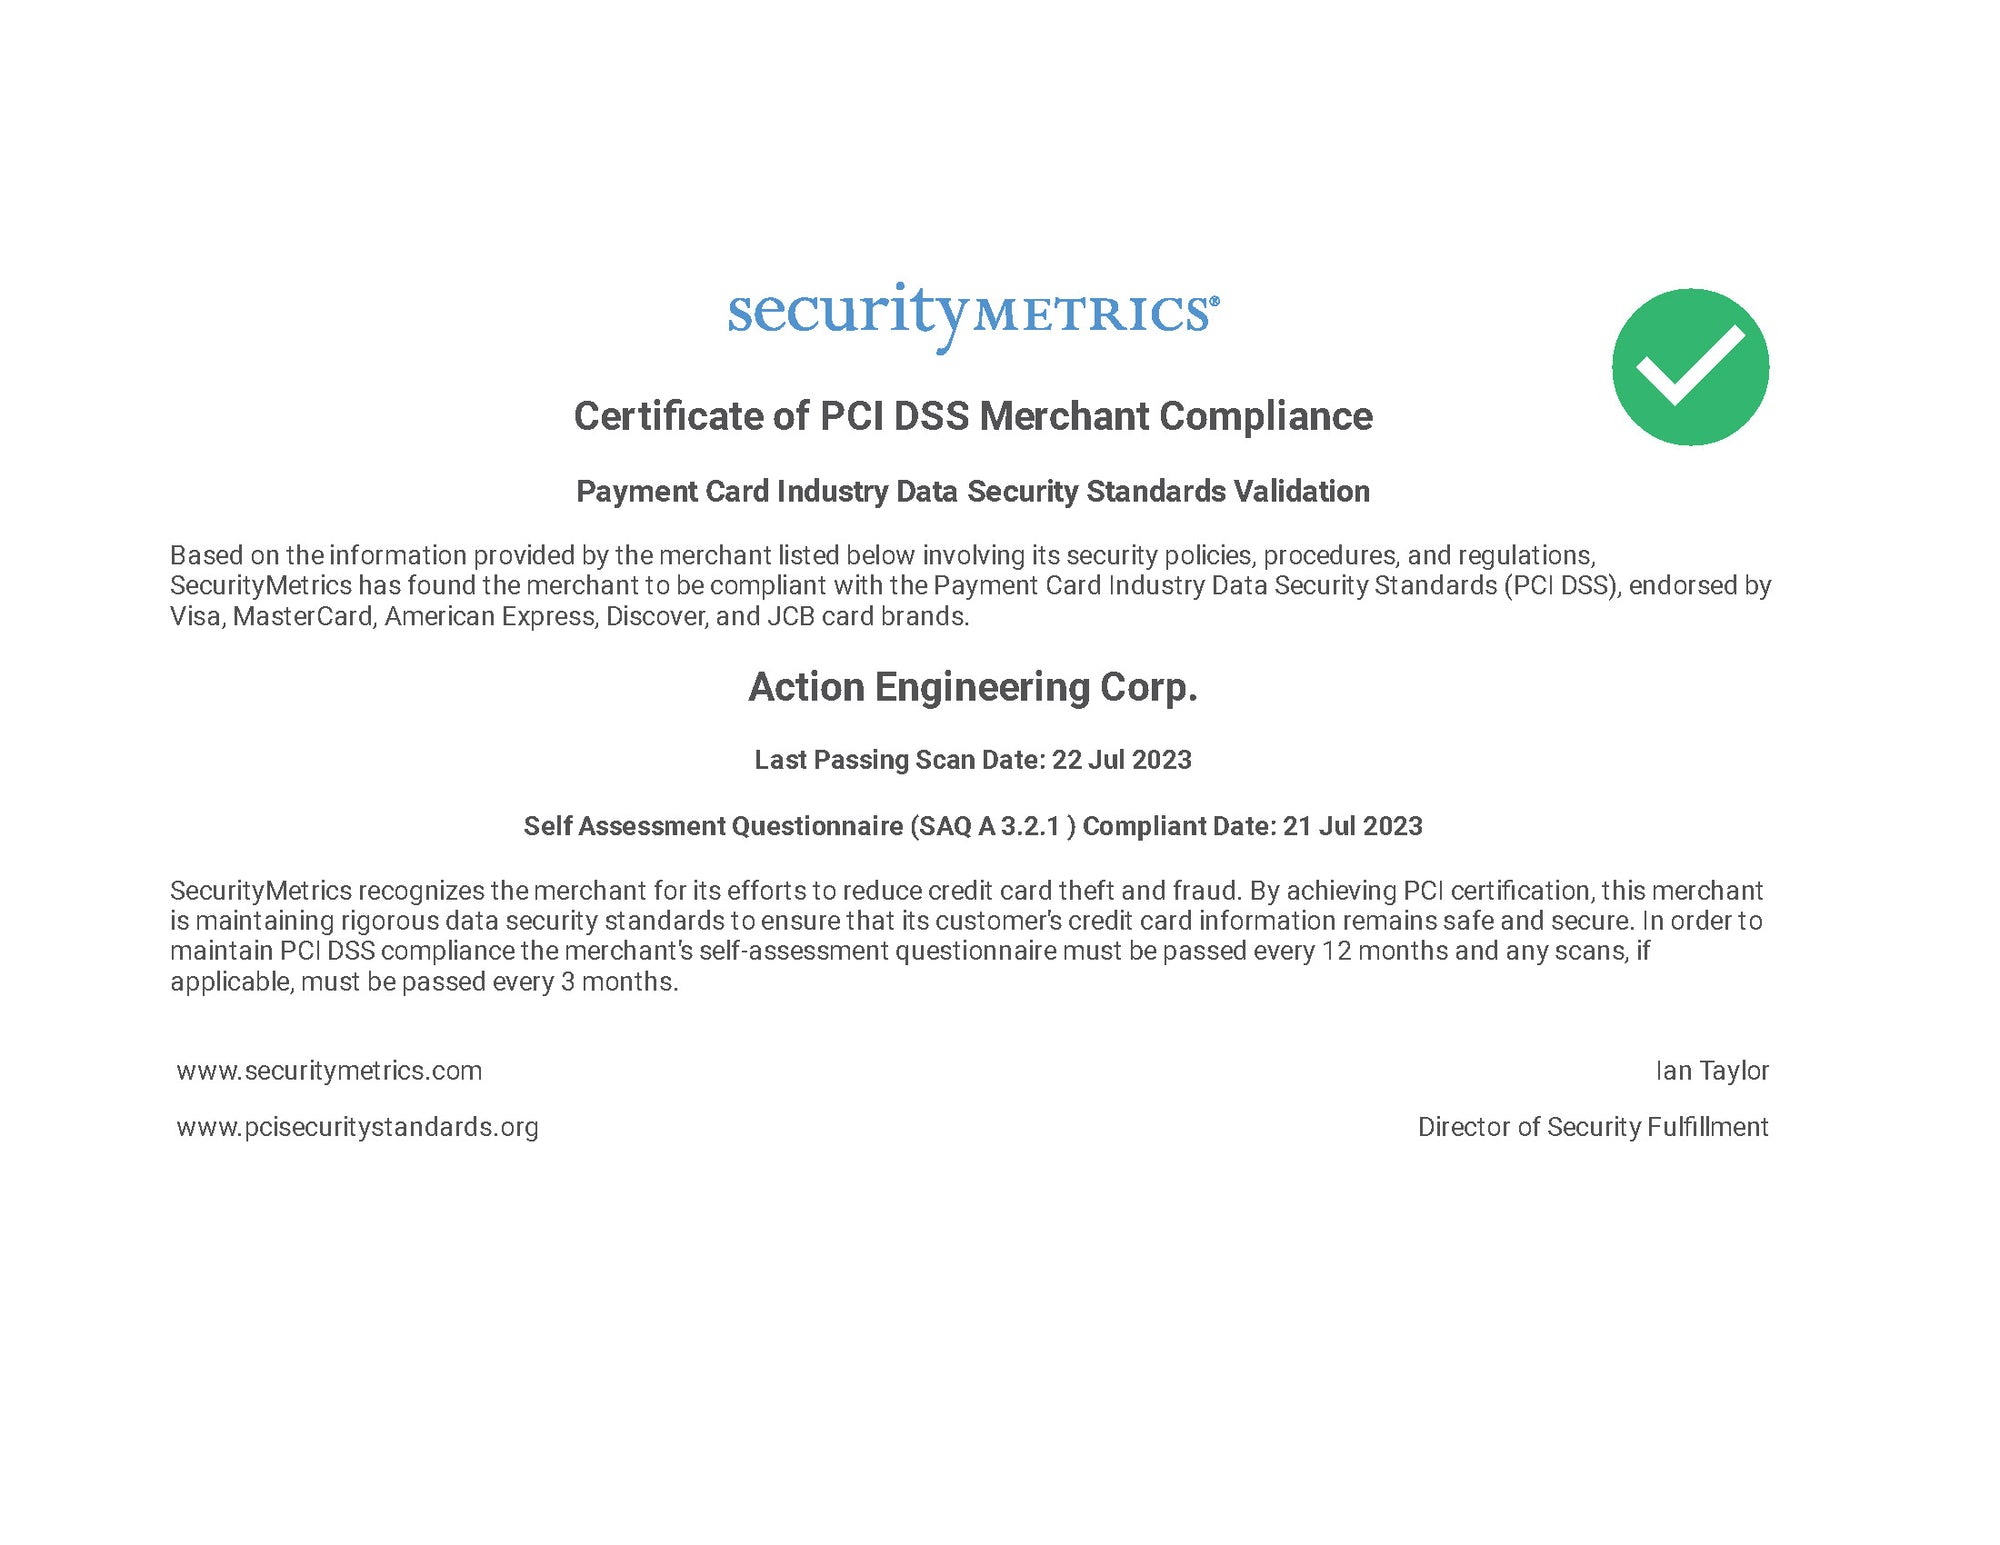 PCI-DSS Compliance Certificate-"Action Engineering Corp." DBA: Dabbing Warehouse